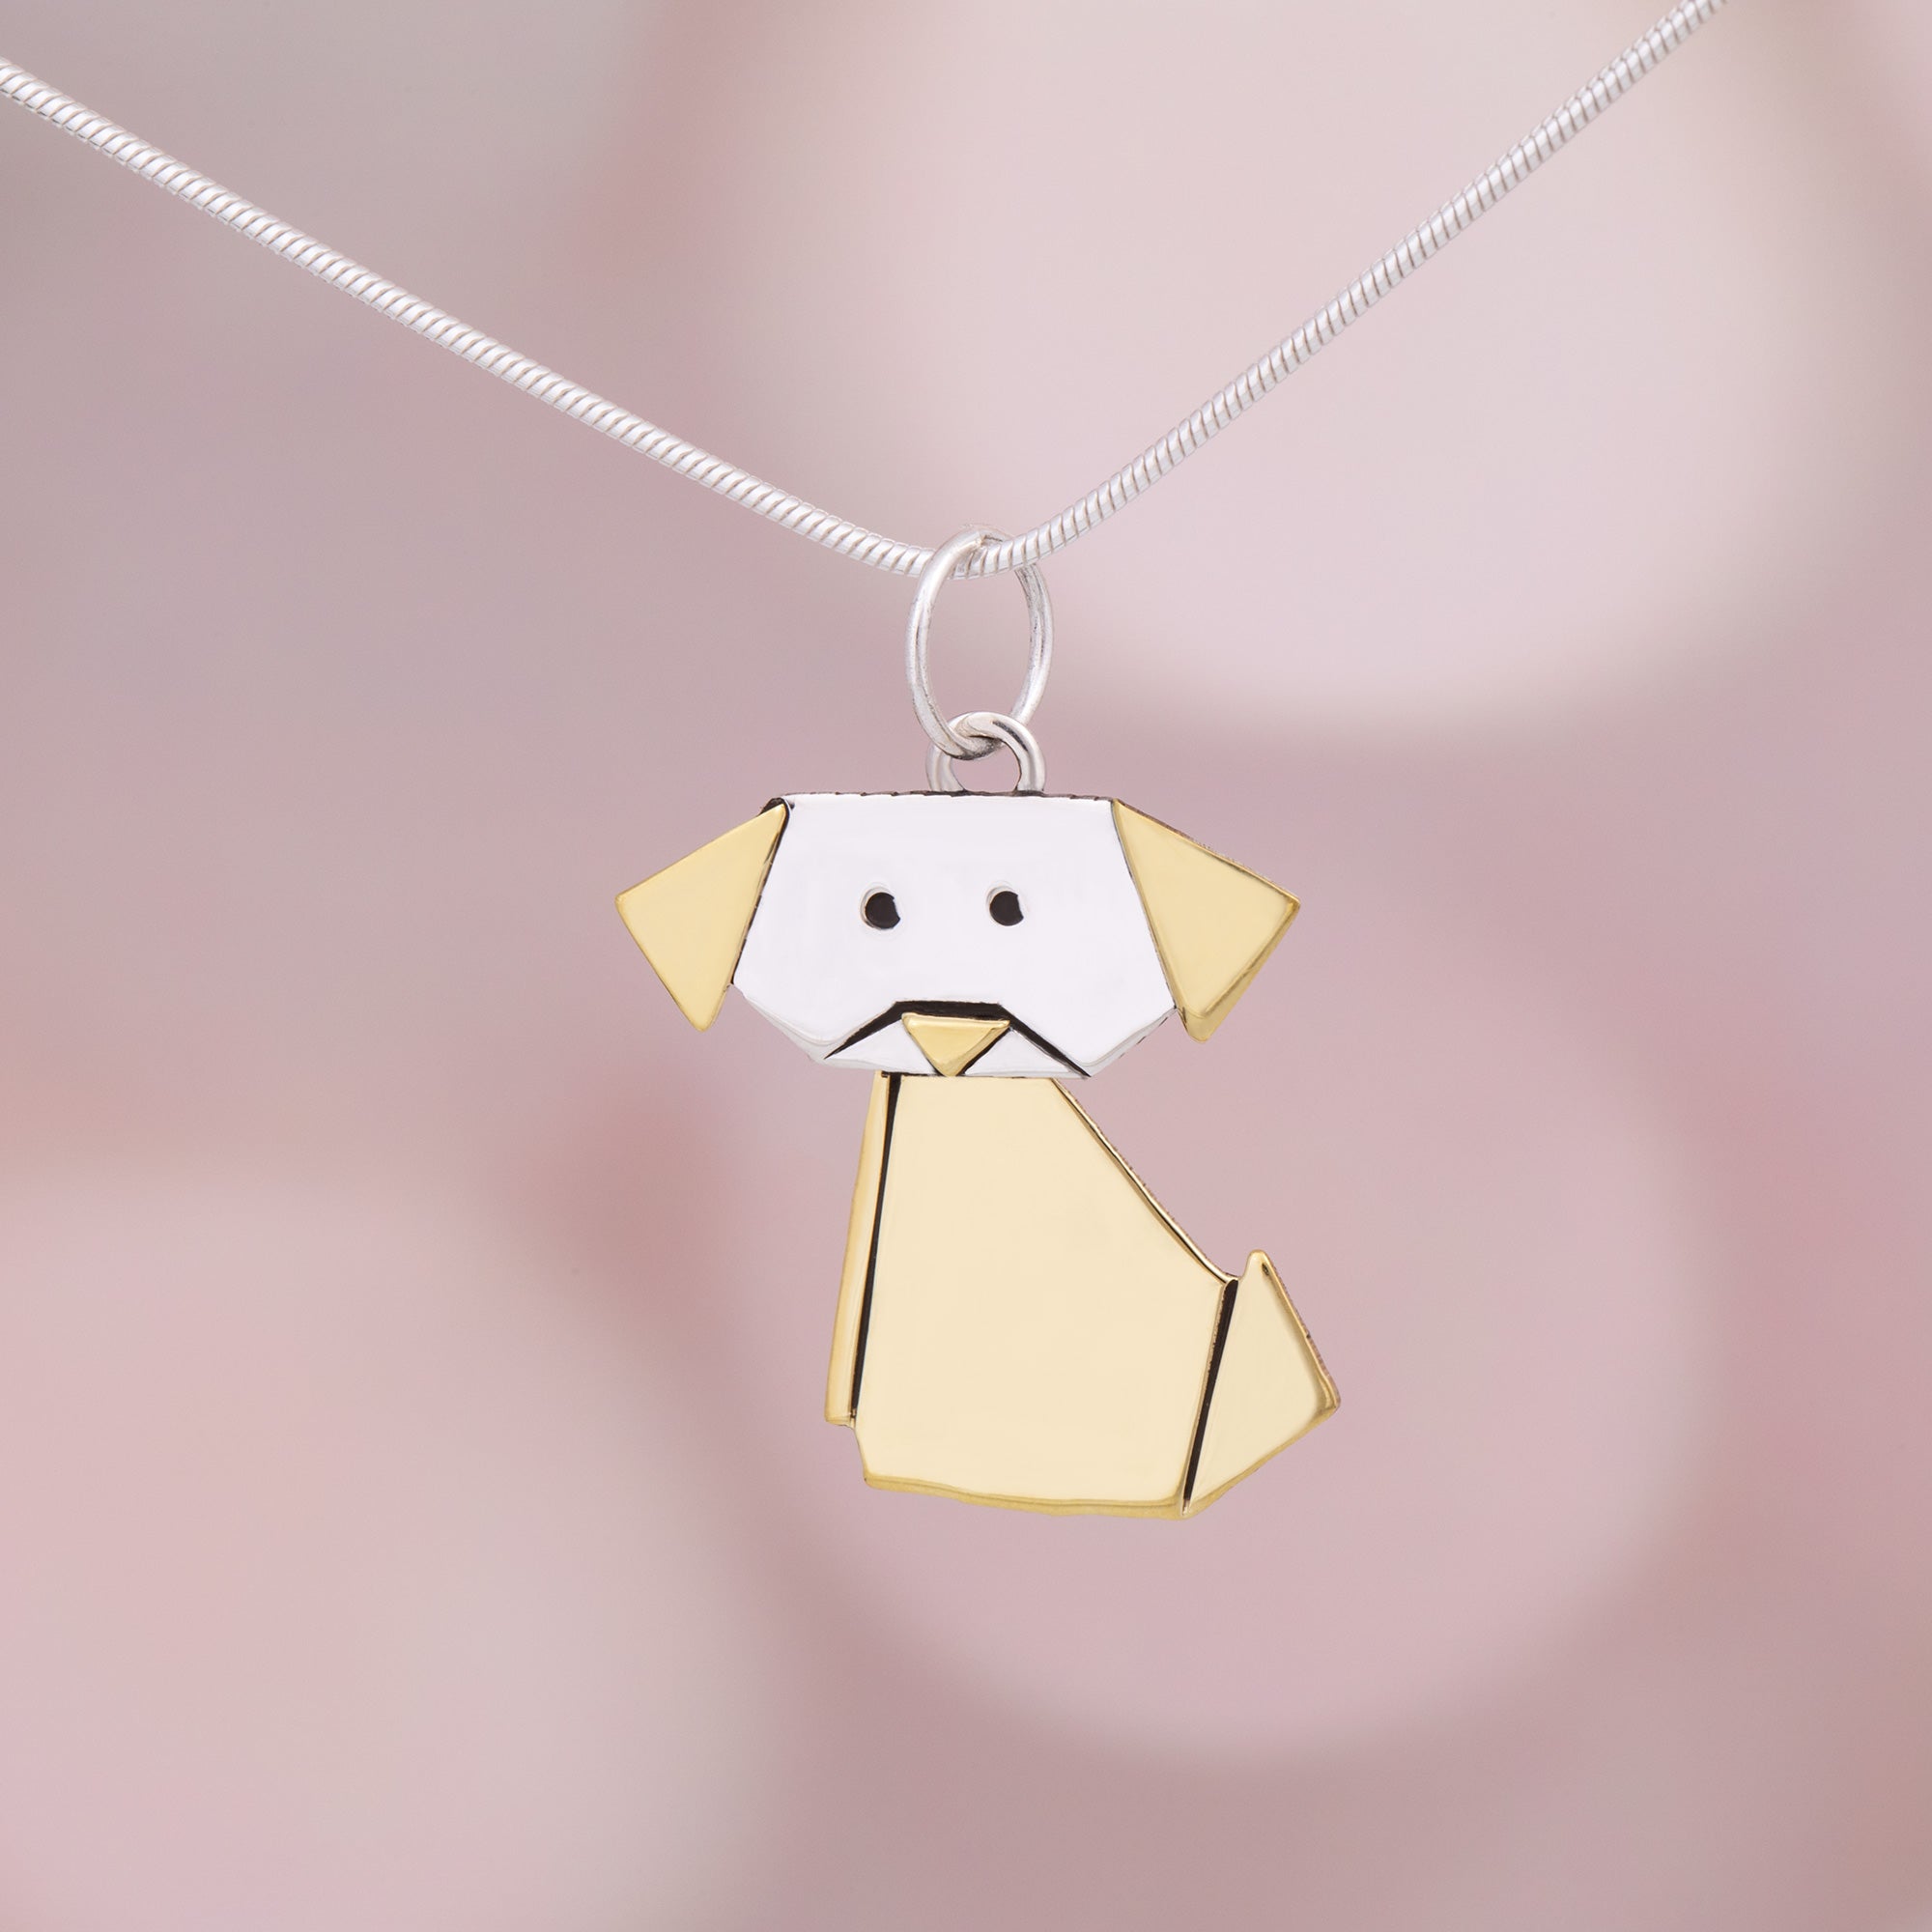 Origami Pet Necklace - Dog - With Diamond Cut Chain